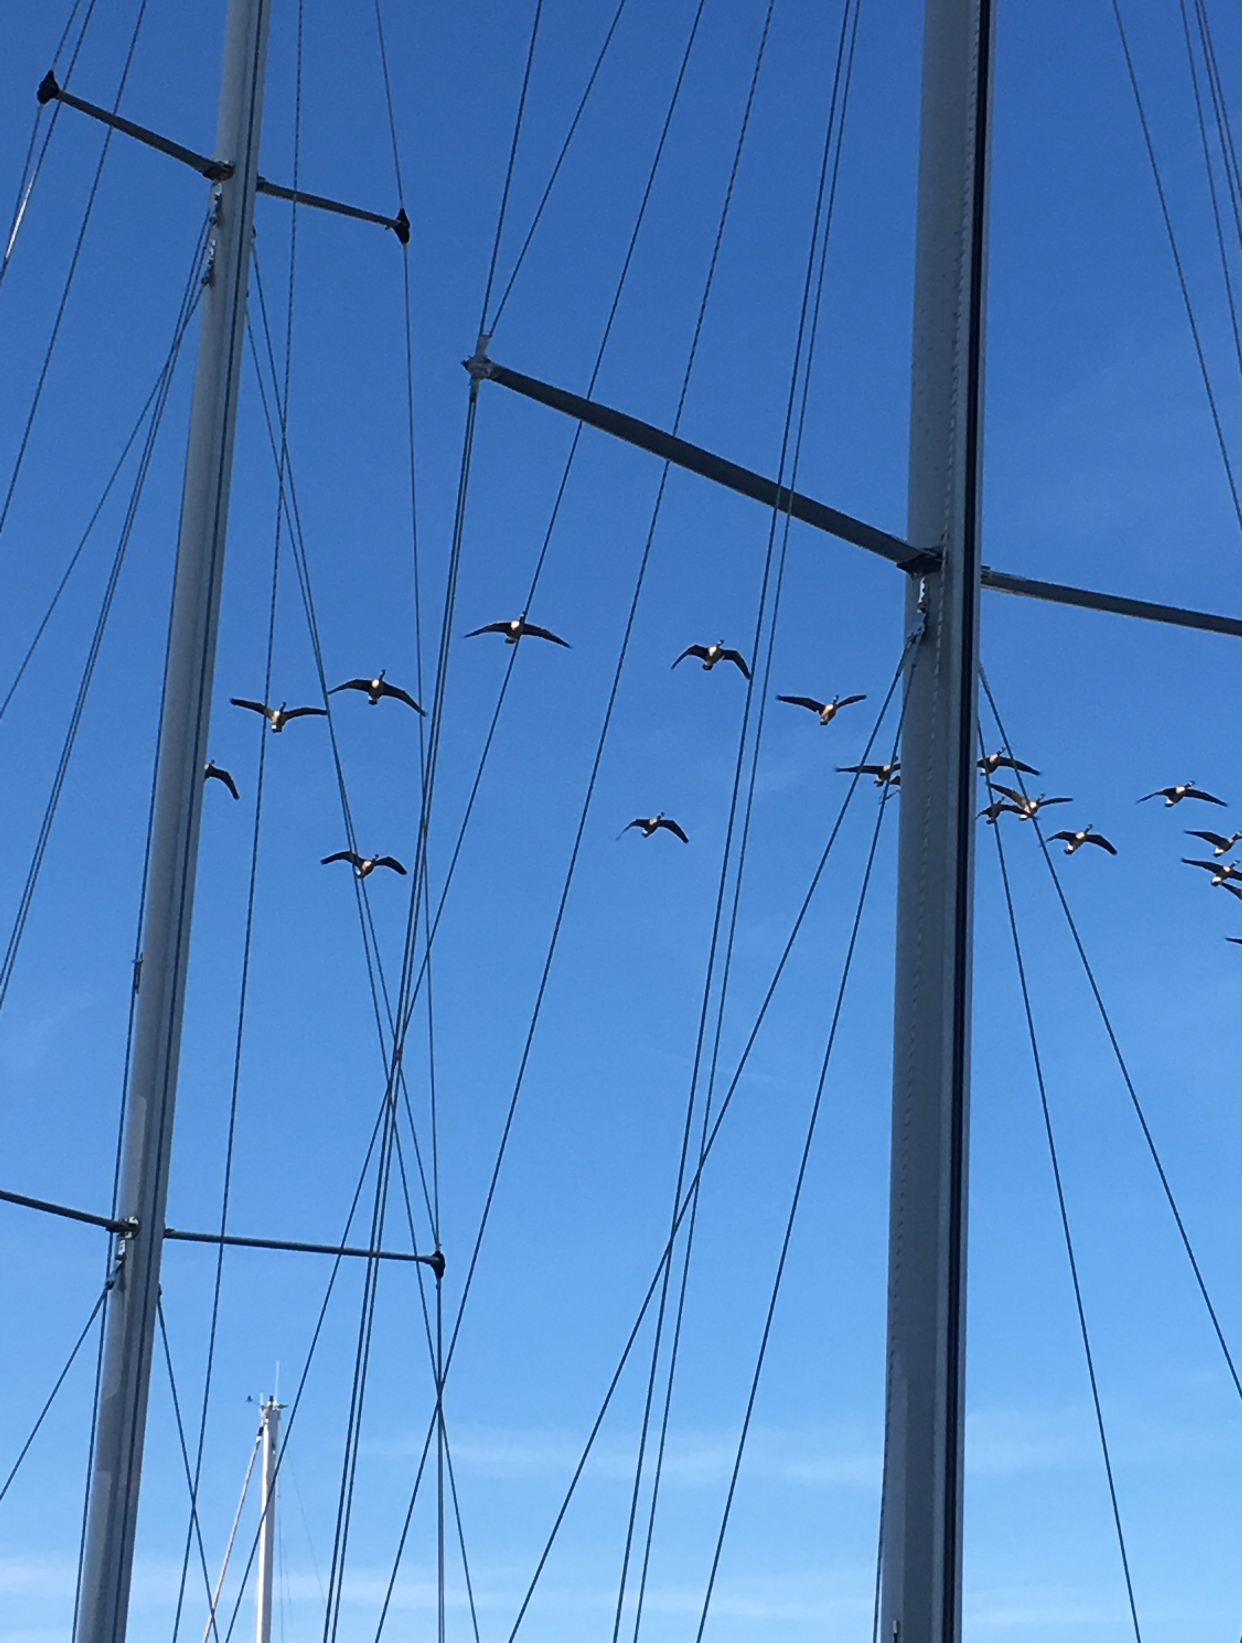 Blue sky with masts and rigging and a flock of birds